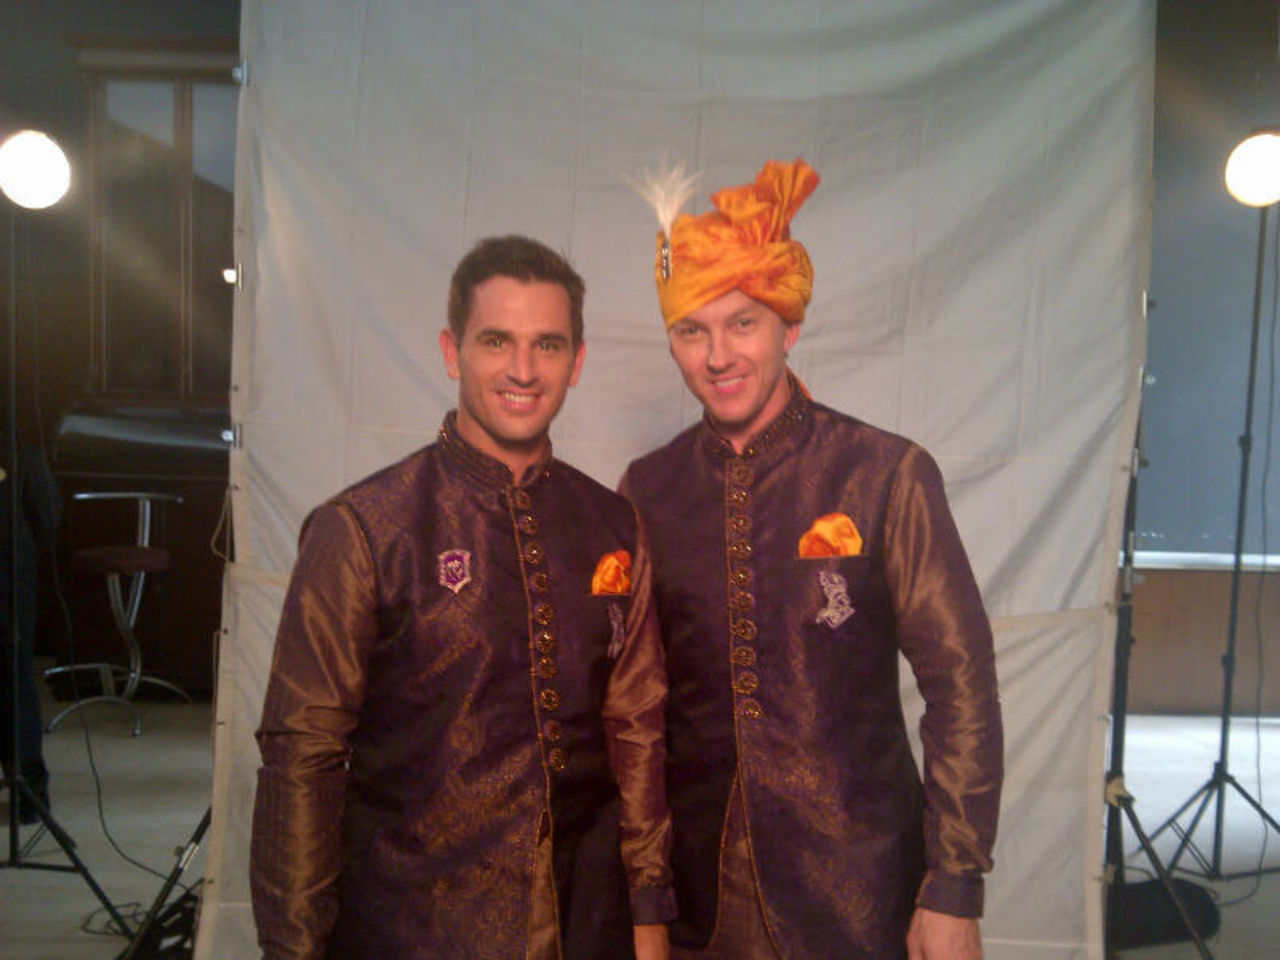 Ryan ten Doeschate and Brett Lee in Indian formal clothes at a promotional event, March 2013